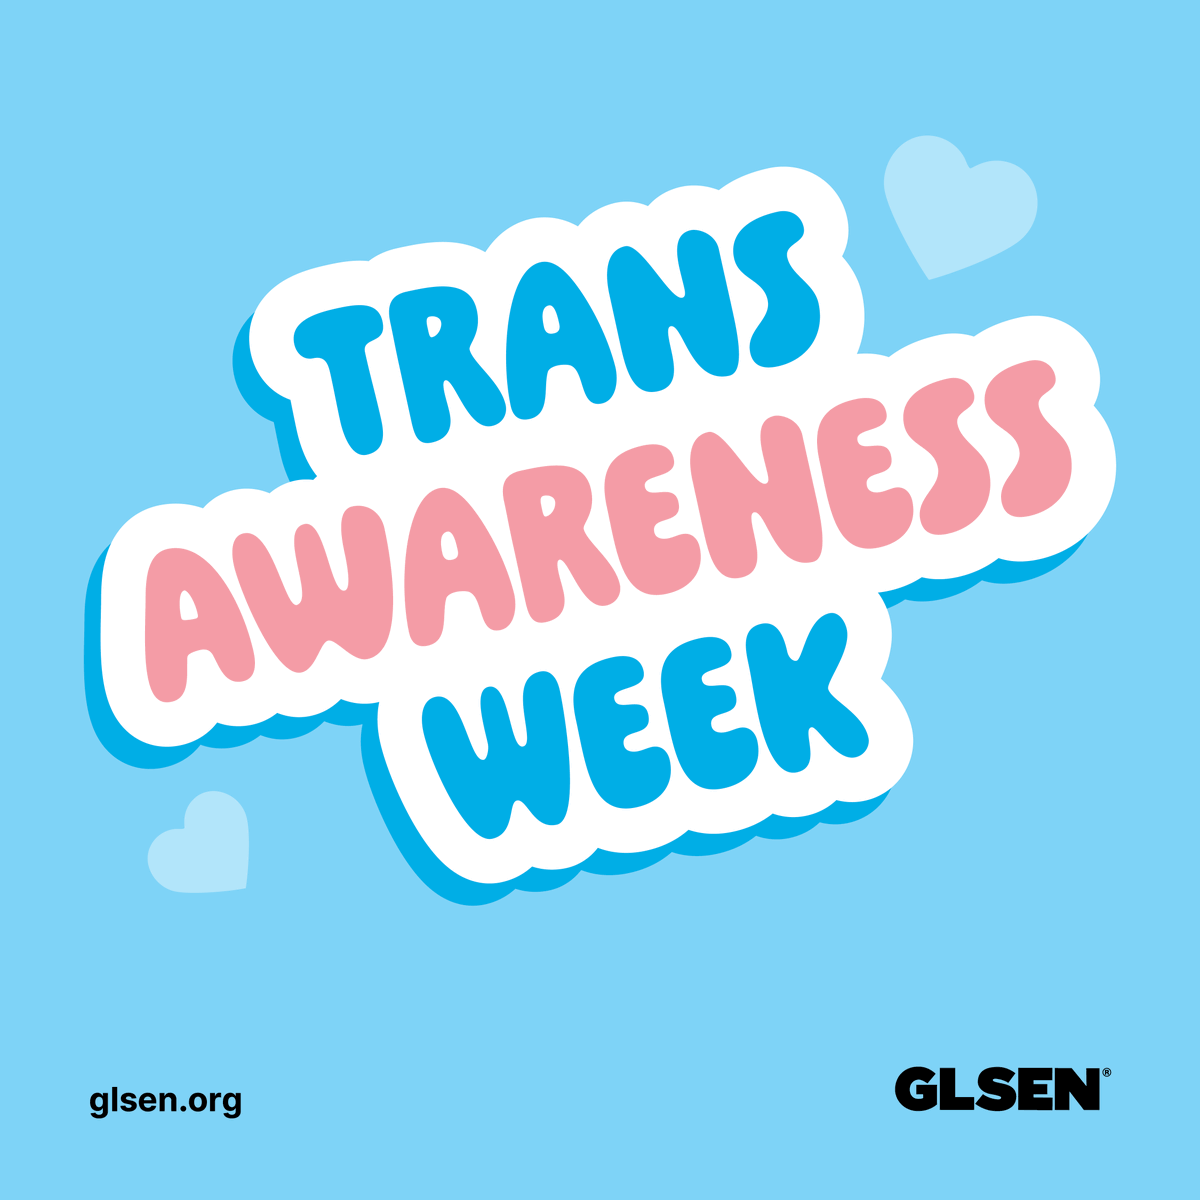 🏳️‍⚧️ Today marks the beginning of Transgender Awareness Week. Stay tuned this week as we share resources on creating safe and inclusive schools for trans students. #TransAwarenessWeek